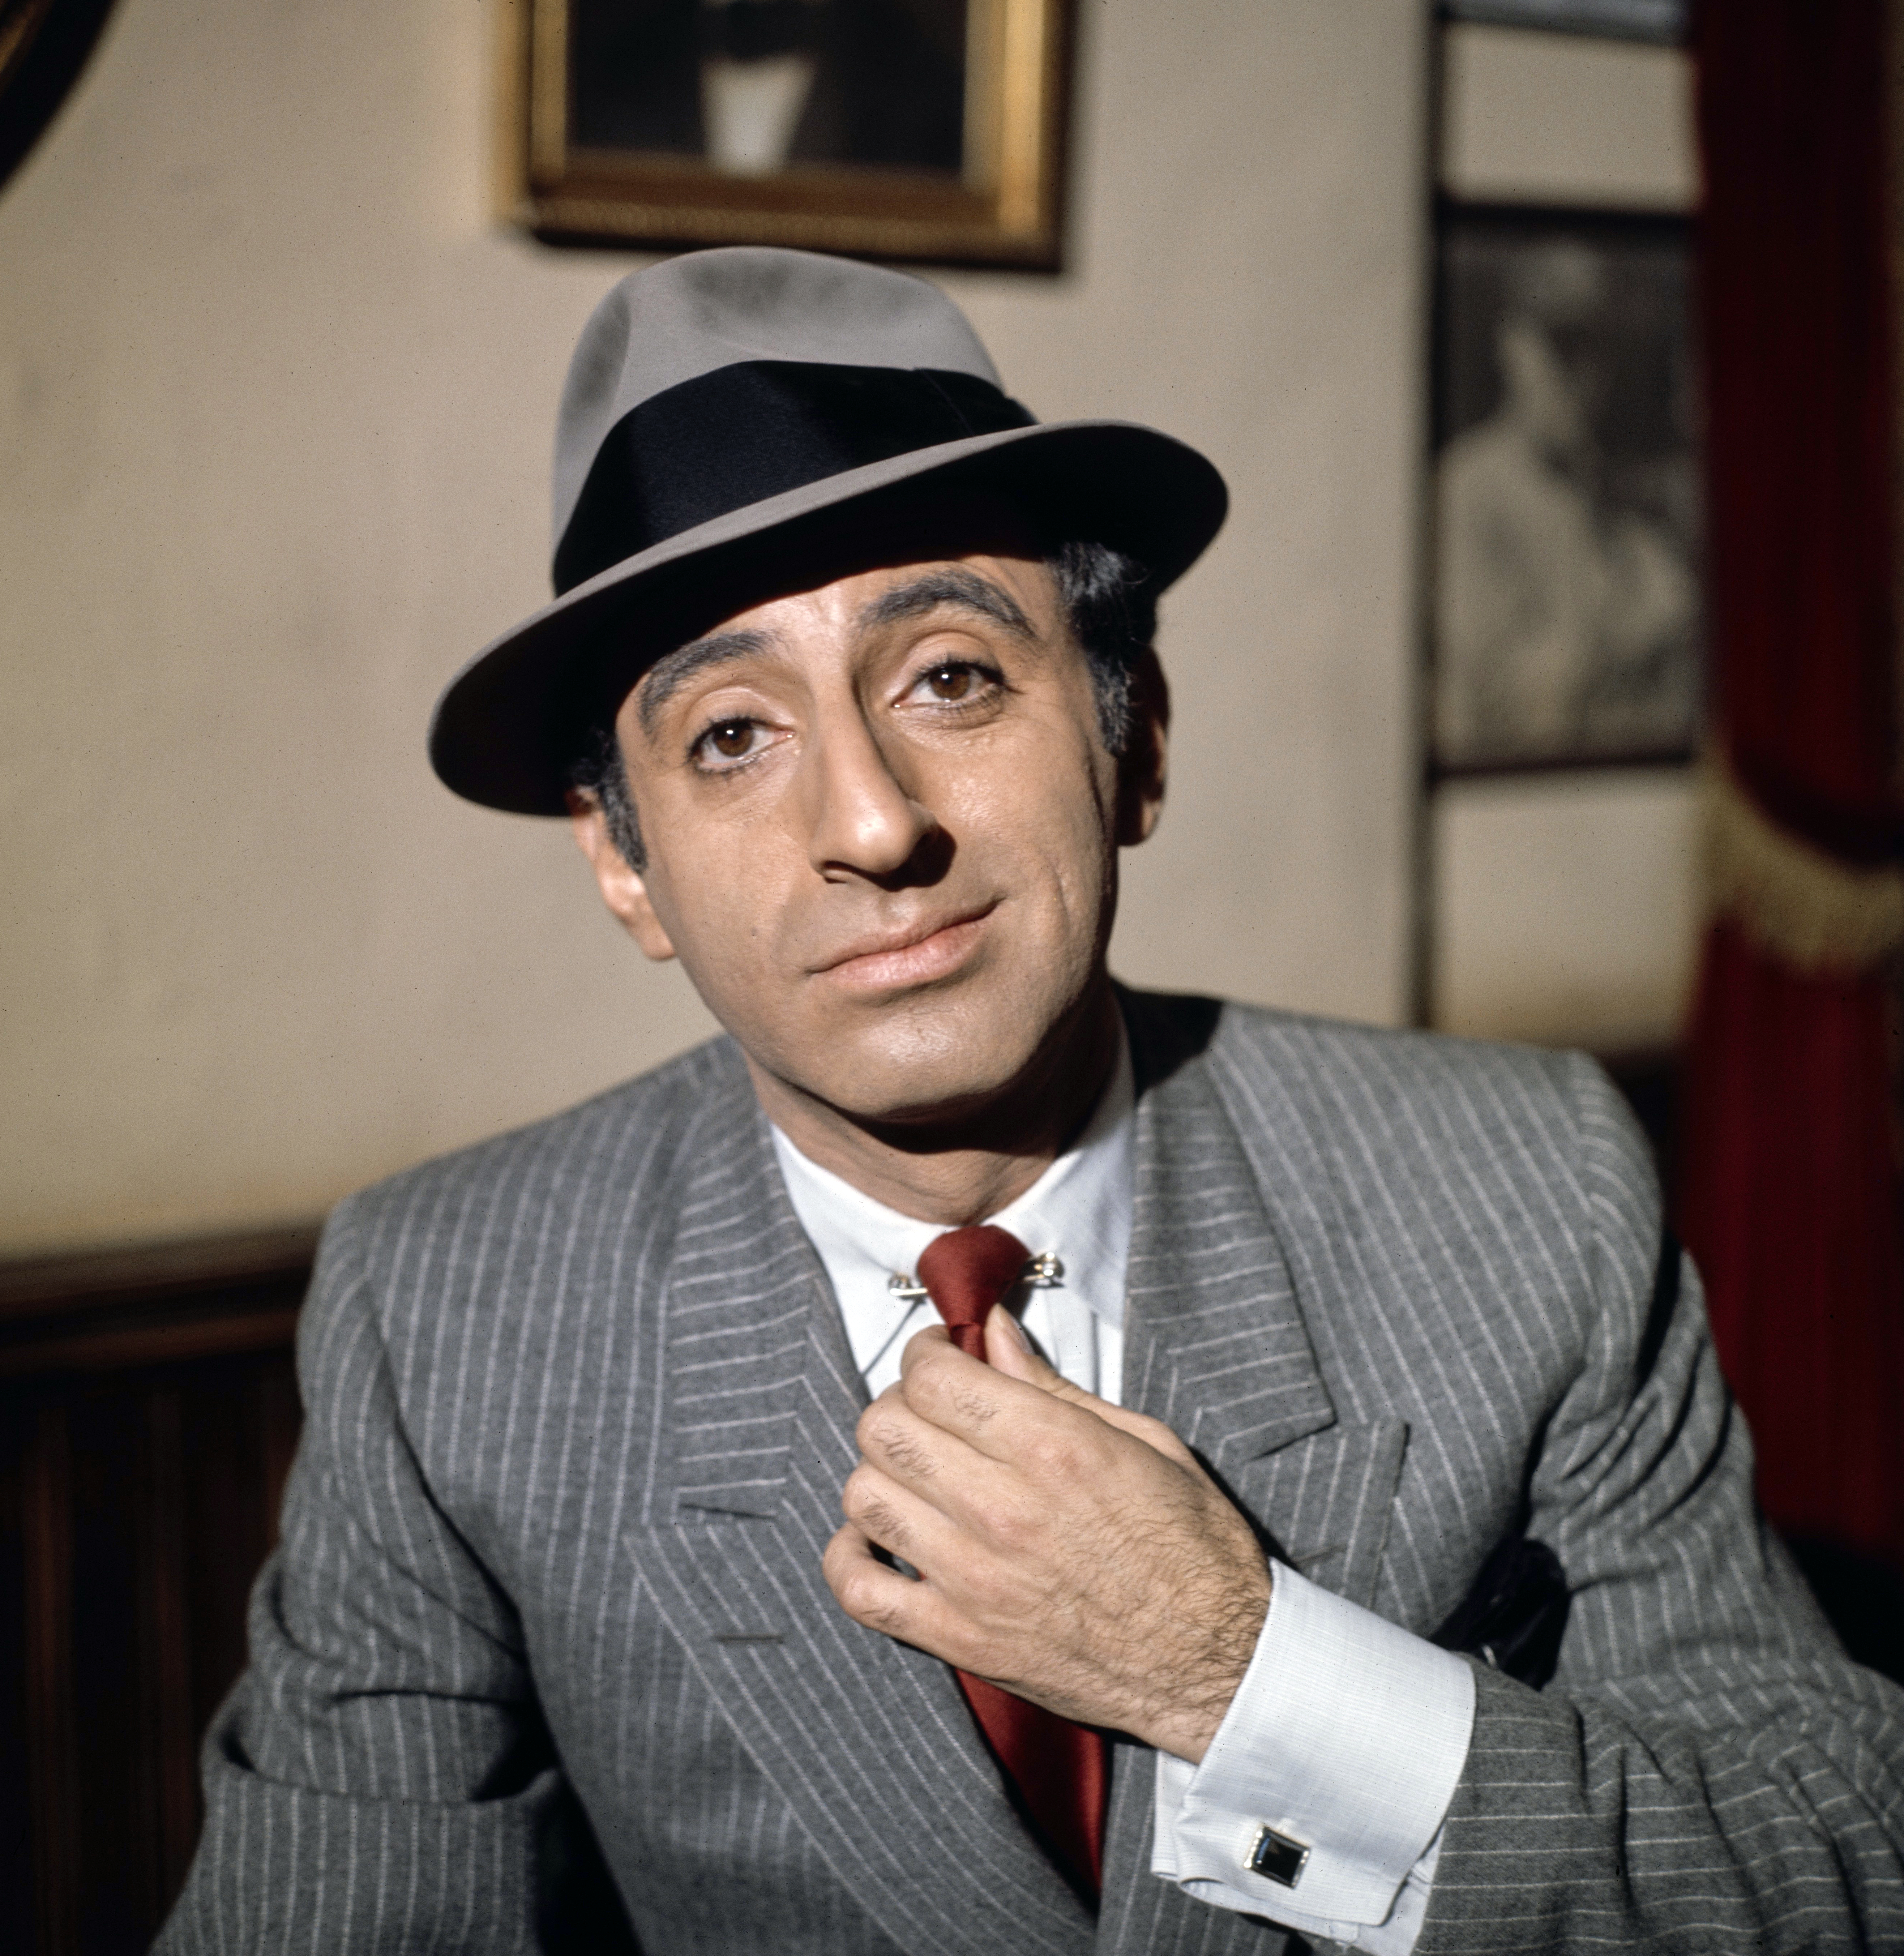 Jamie Farr as Duke in the CBS sitcom "The Chicago Teddy Bears" on September 17, 1971 | Source: Getty Images